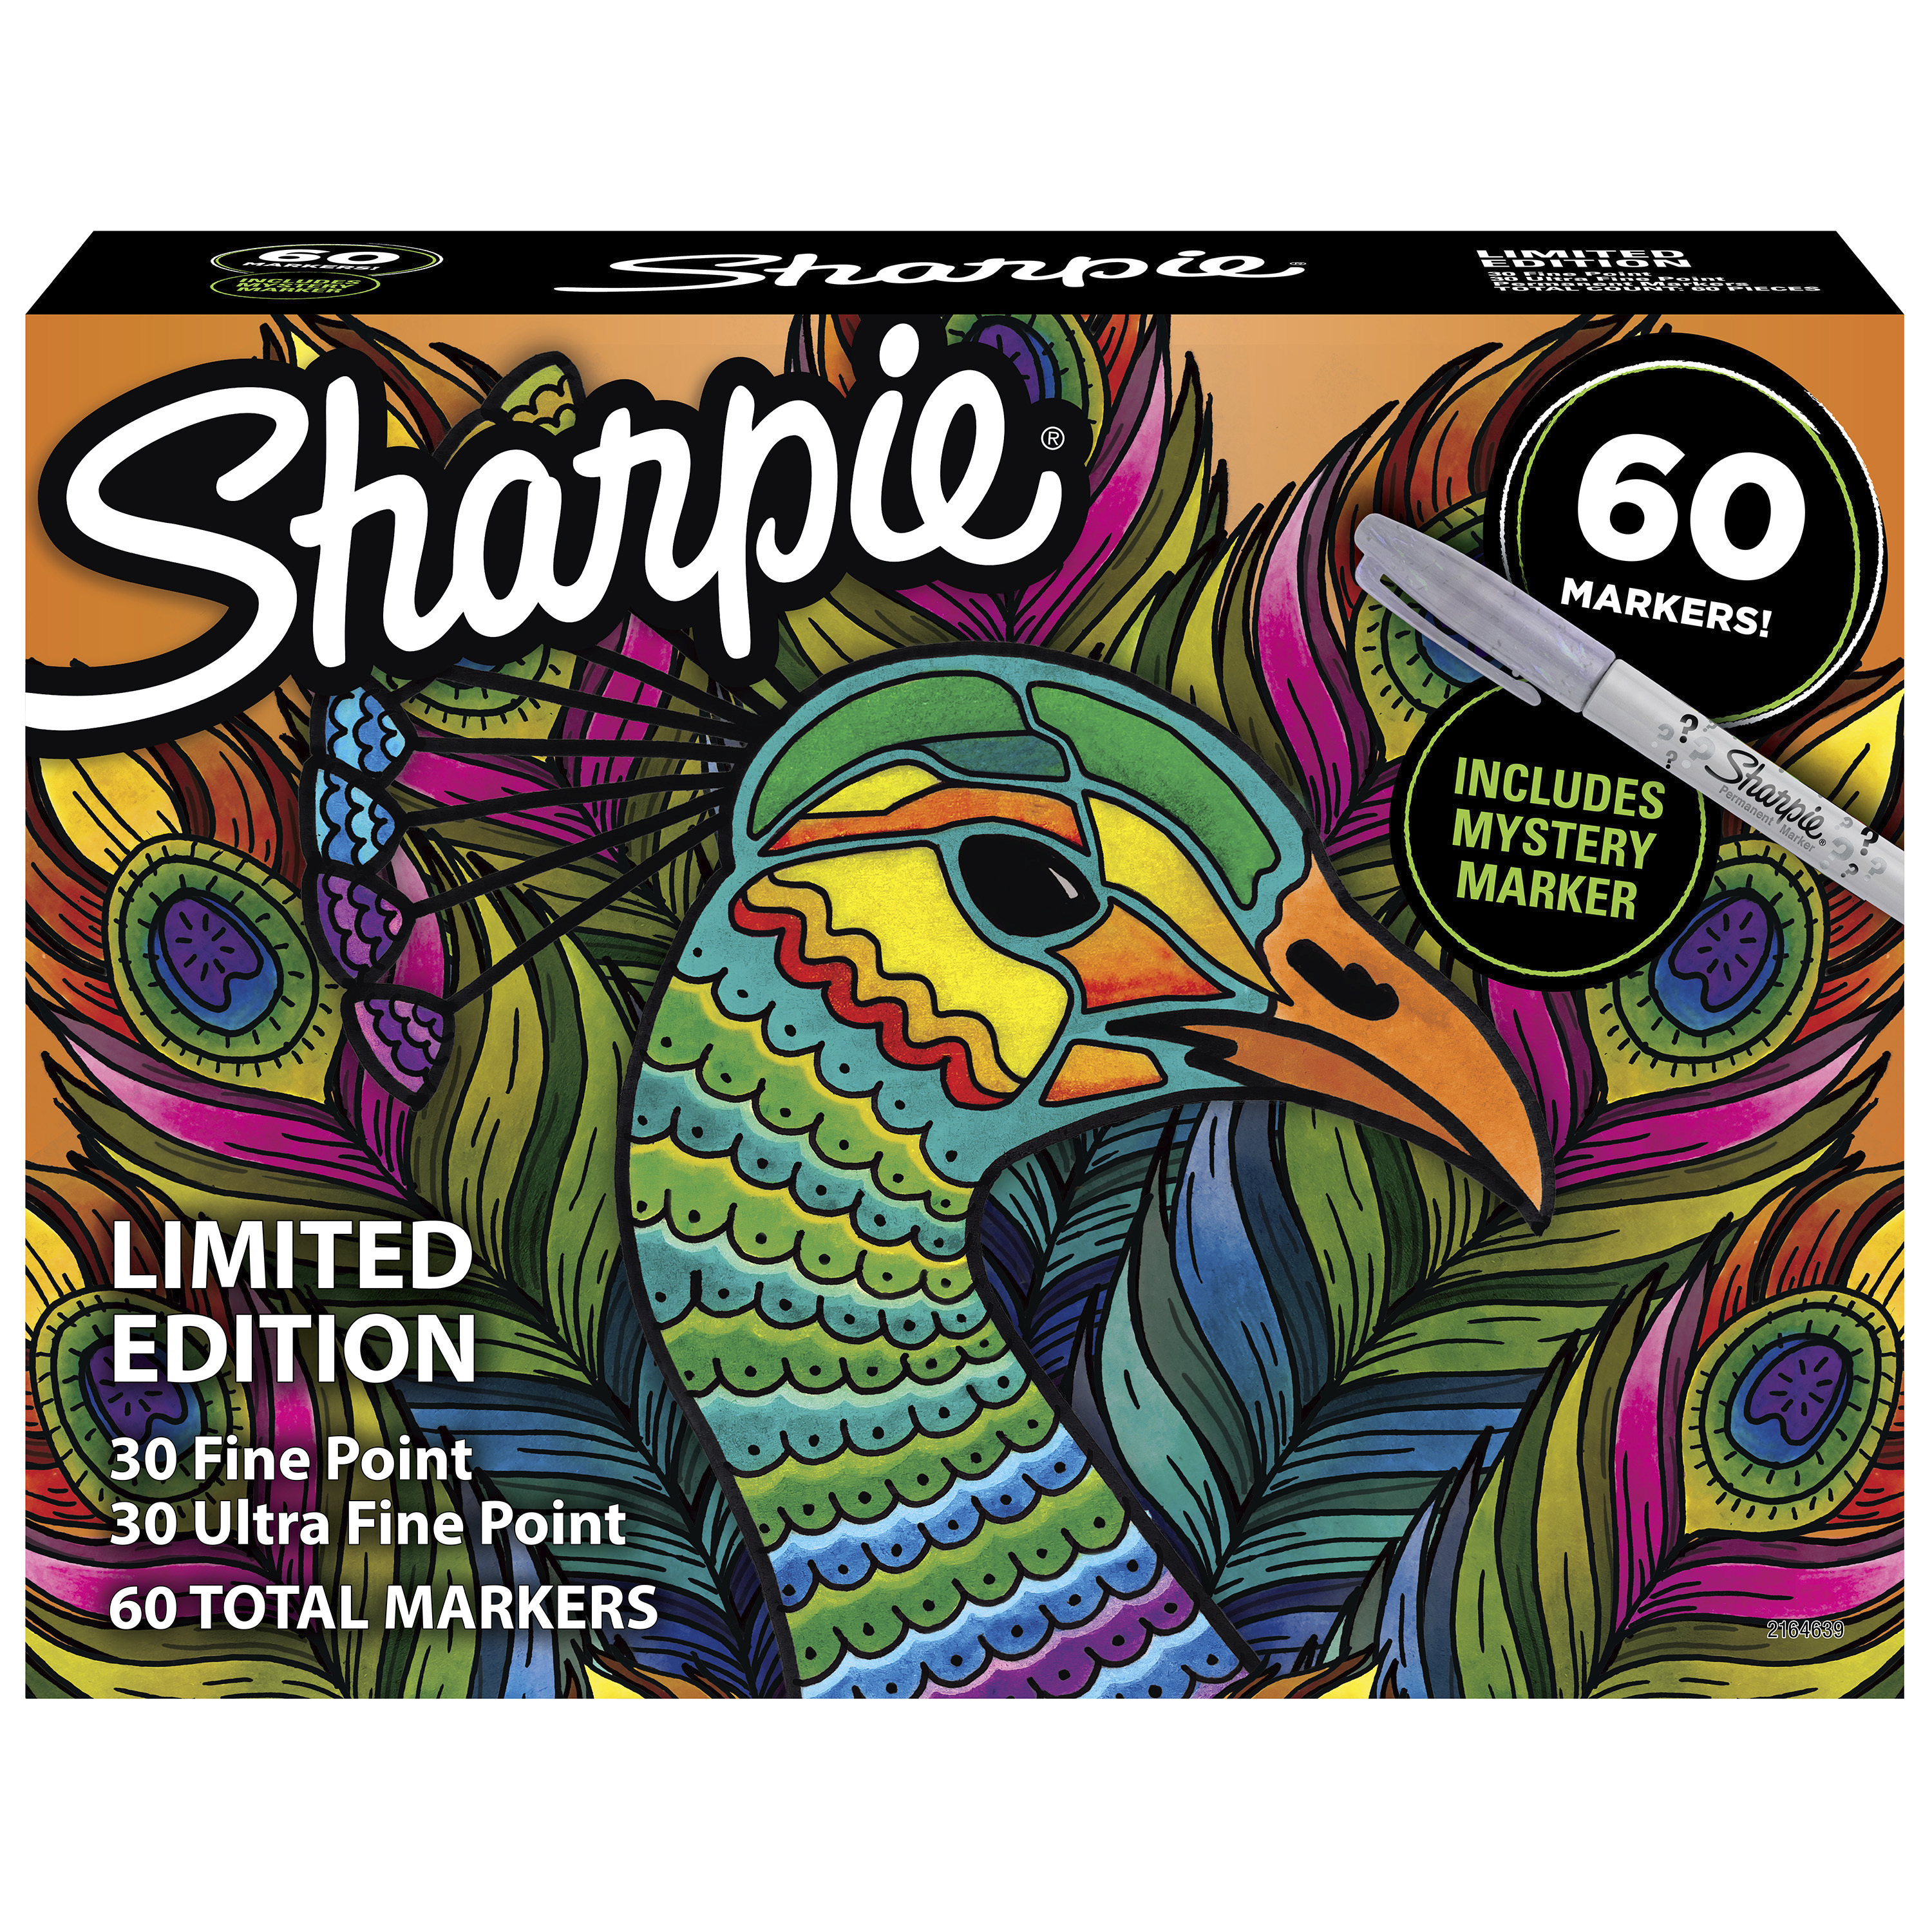 Sharpie Permanent Markers, Limited Edition, Assorted Colors Plus 1 Mystery Marker, 60 Count - image 1 of 9